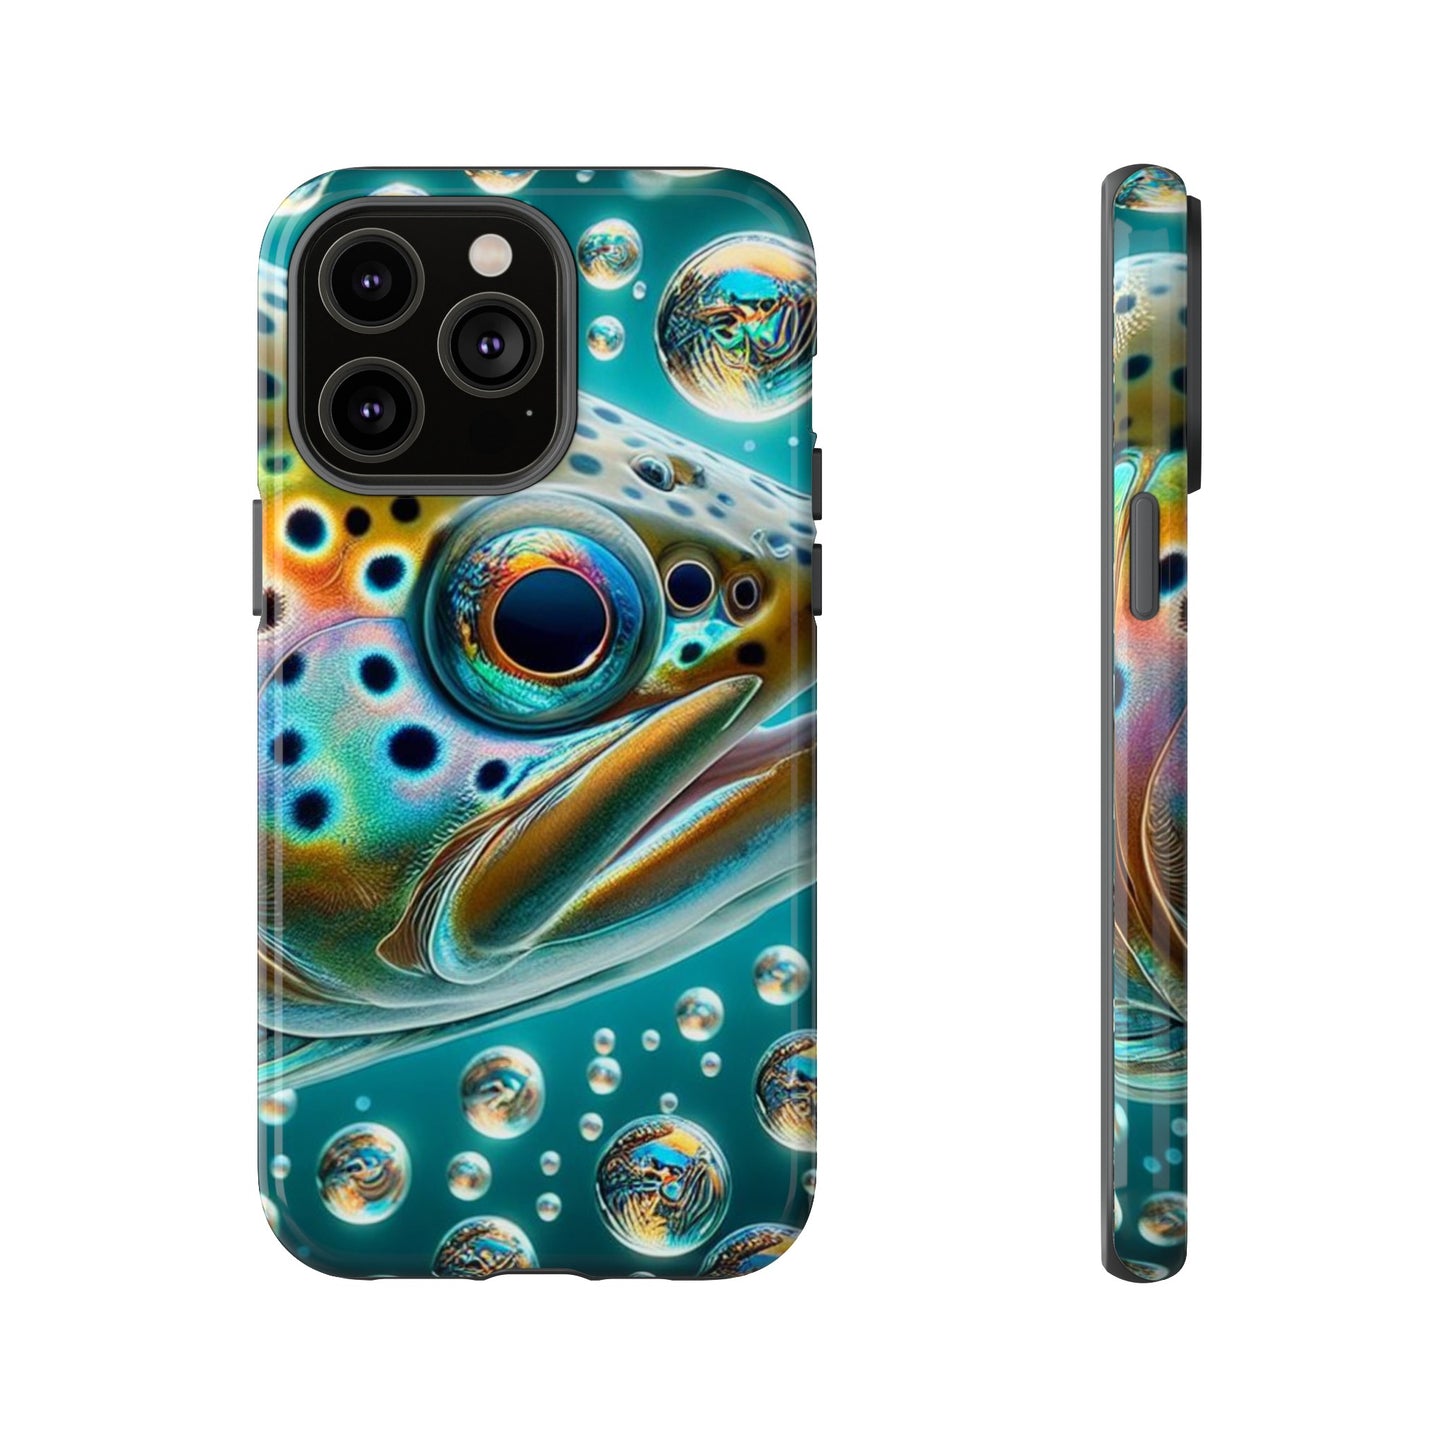 Trout Phone Case, Fishing Phone Case, iPhone Case